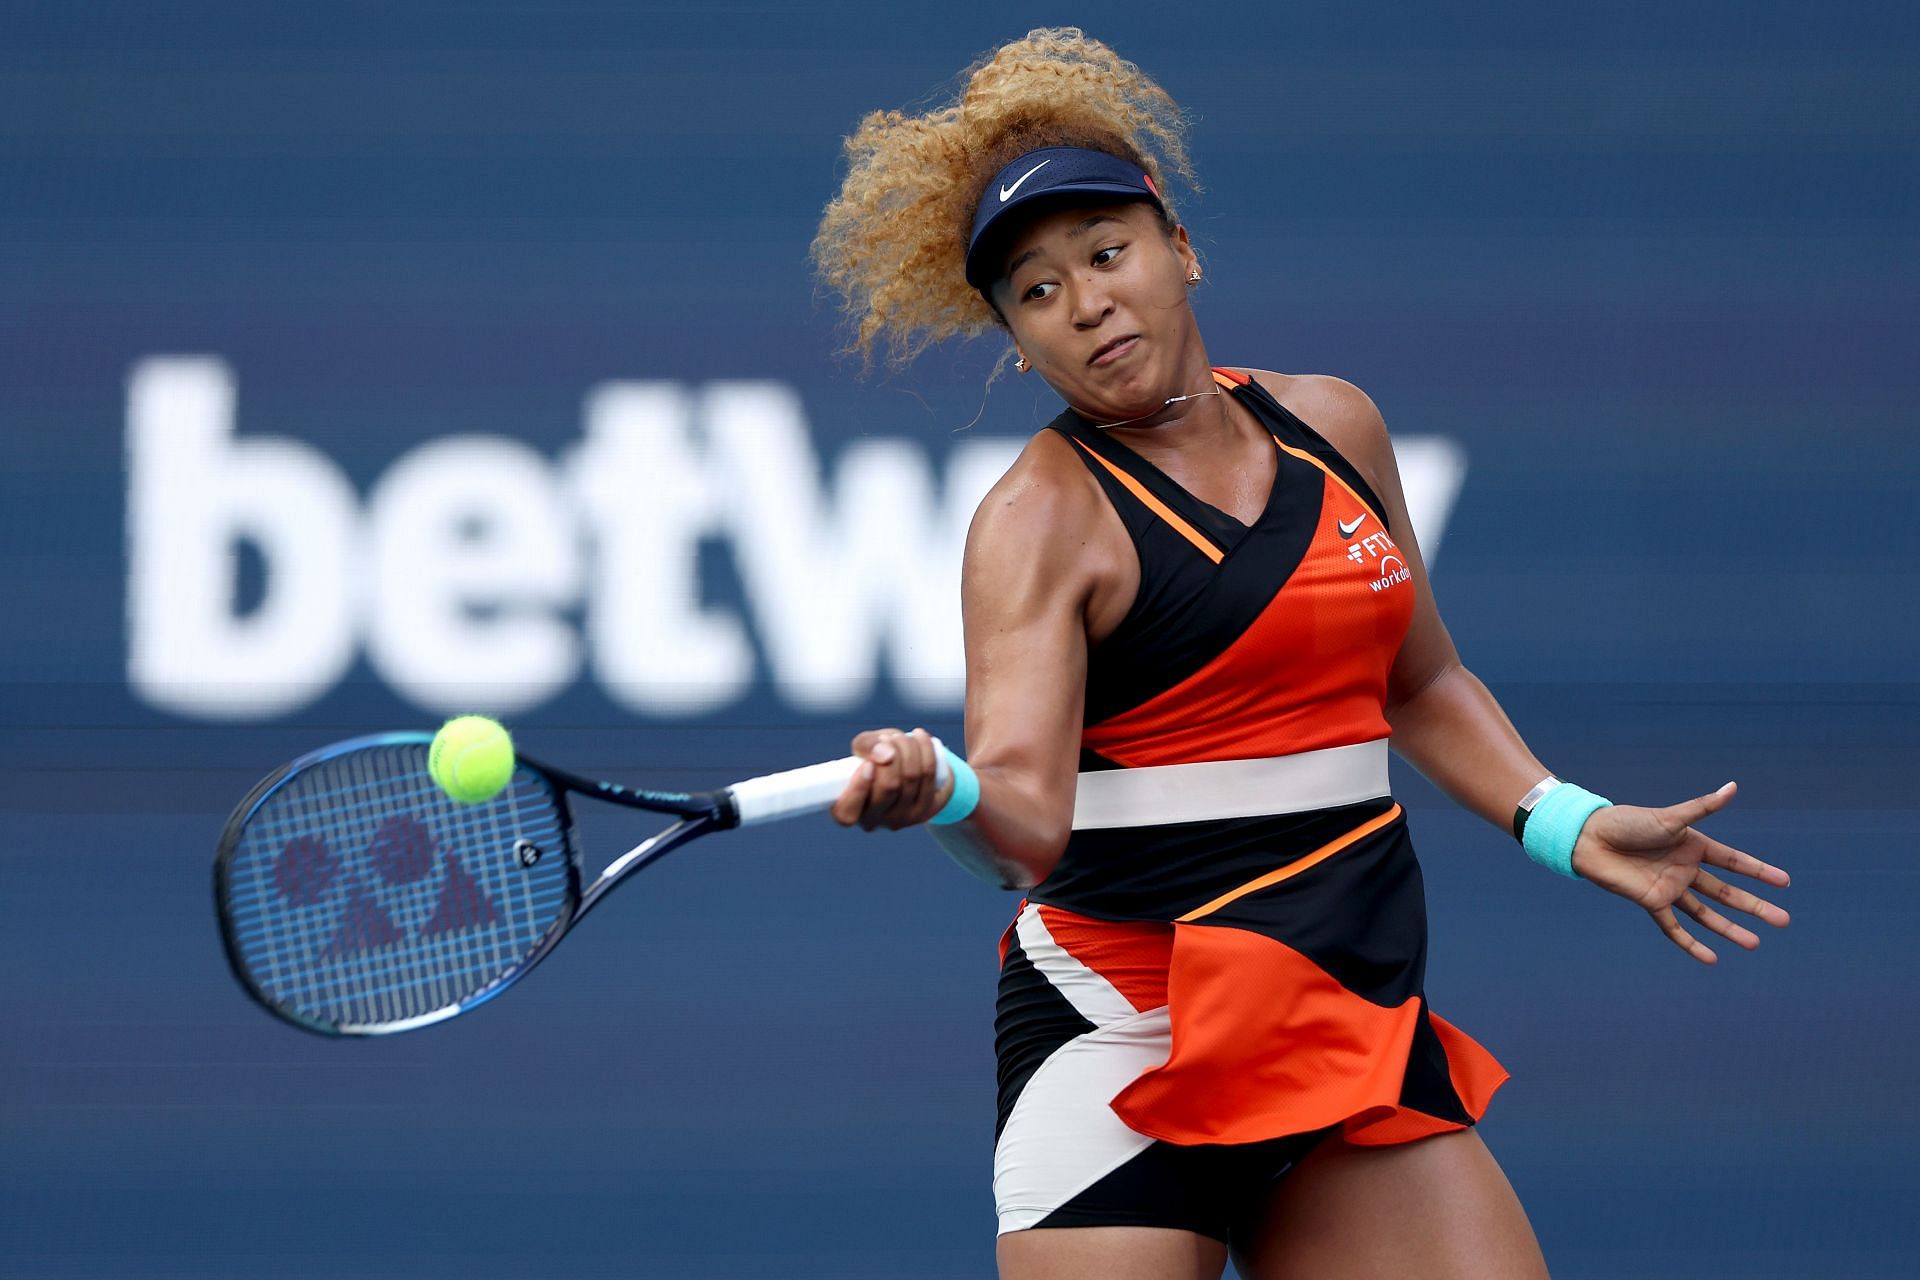 Naomi Osaka has received a wildcard for the Madrid Open